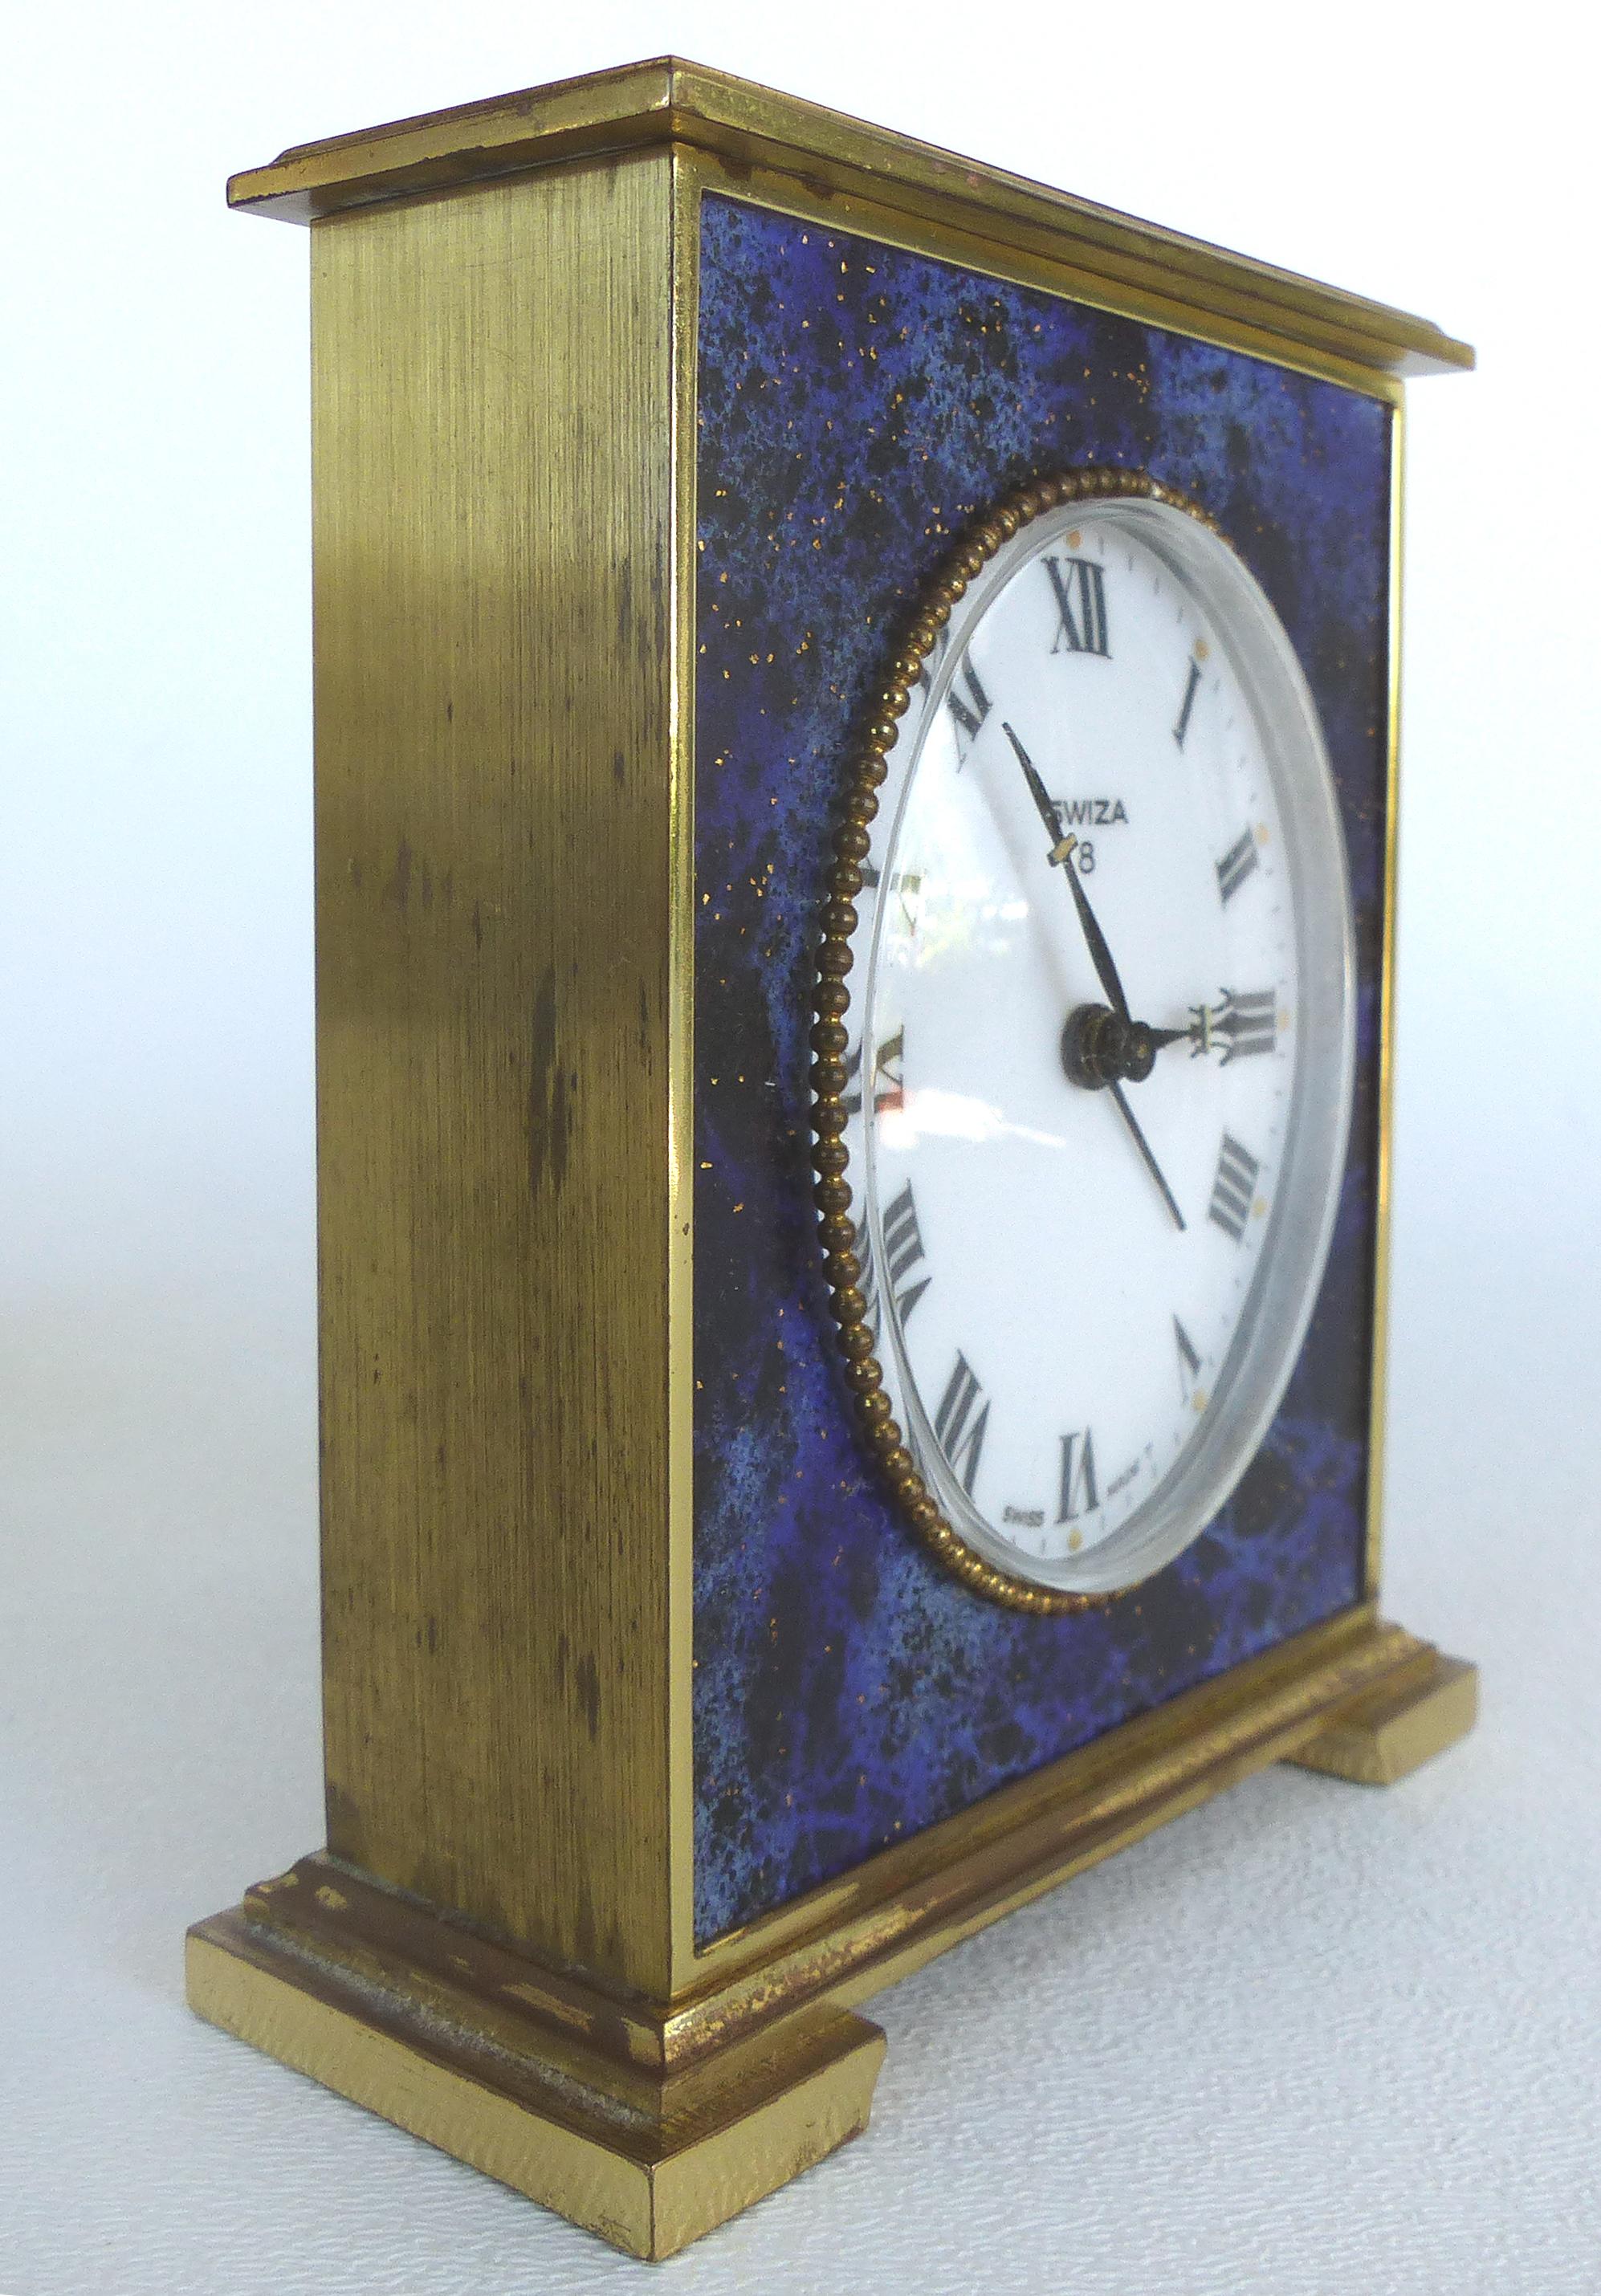 Offered for sale is an elegant Swiza 8 Swiss-made lapis lazuli and brass winding carriage clock.  
The clock keeps time, however. the sweep seconds hand does not work. 
